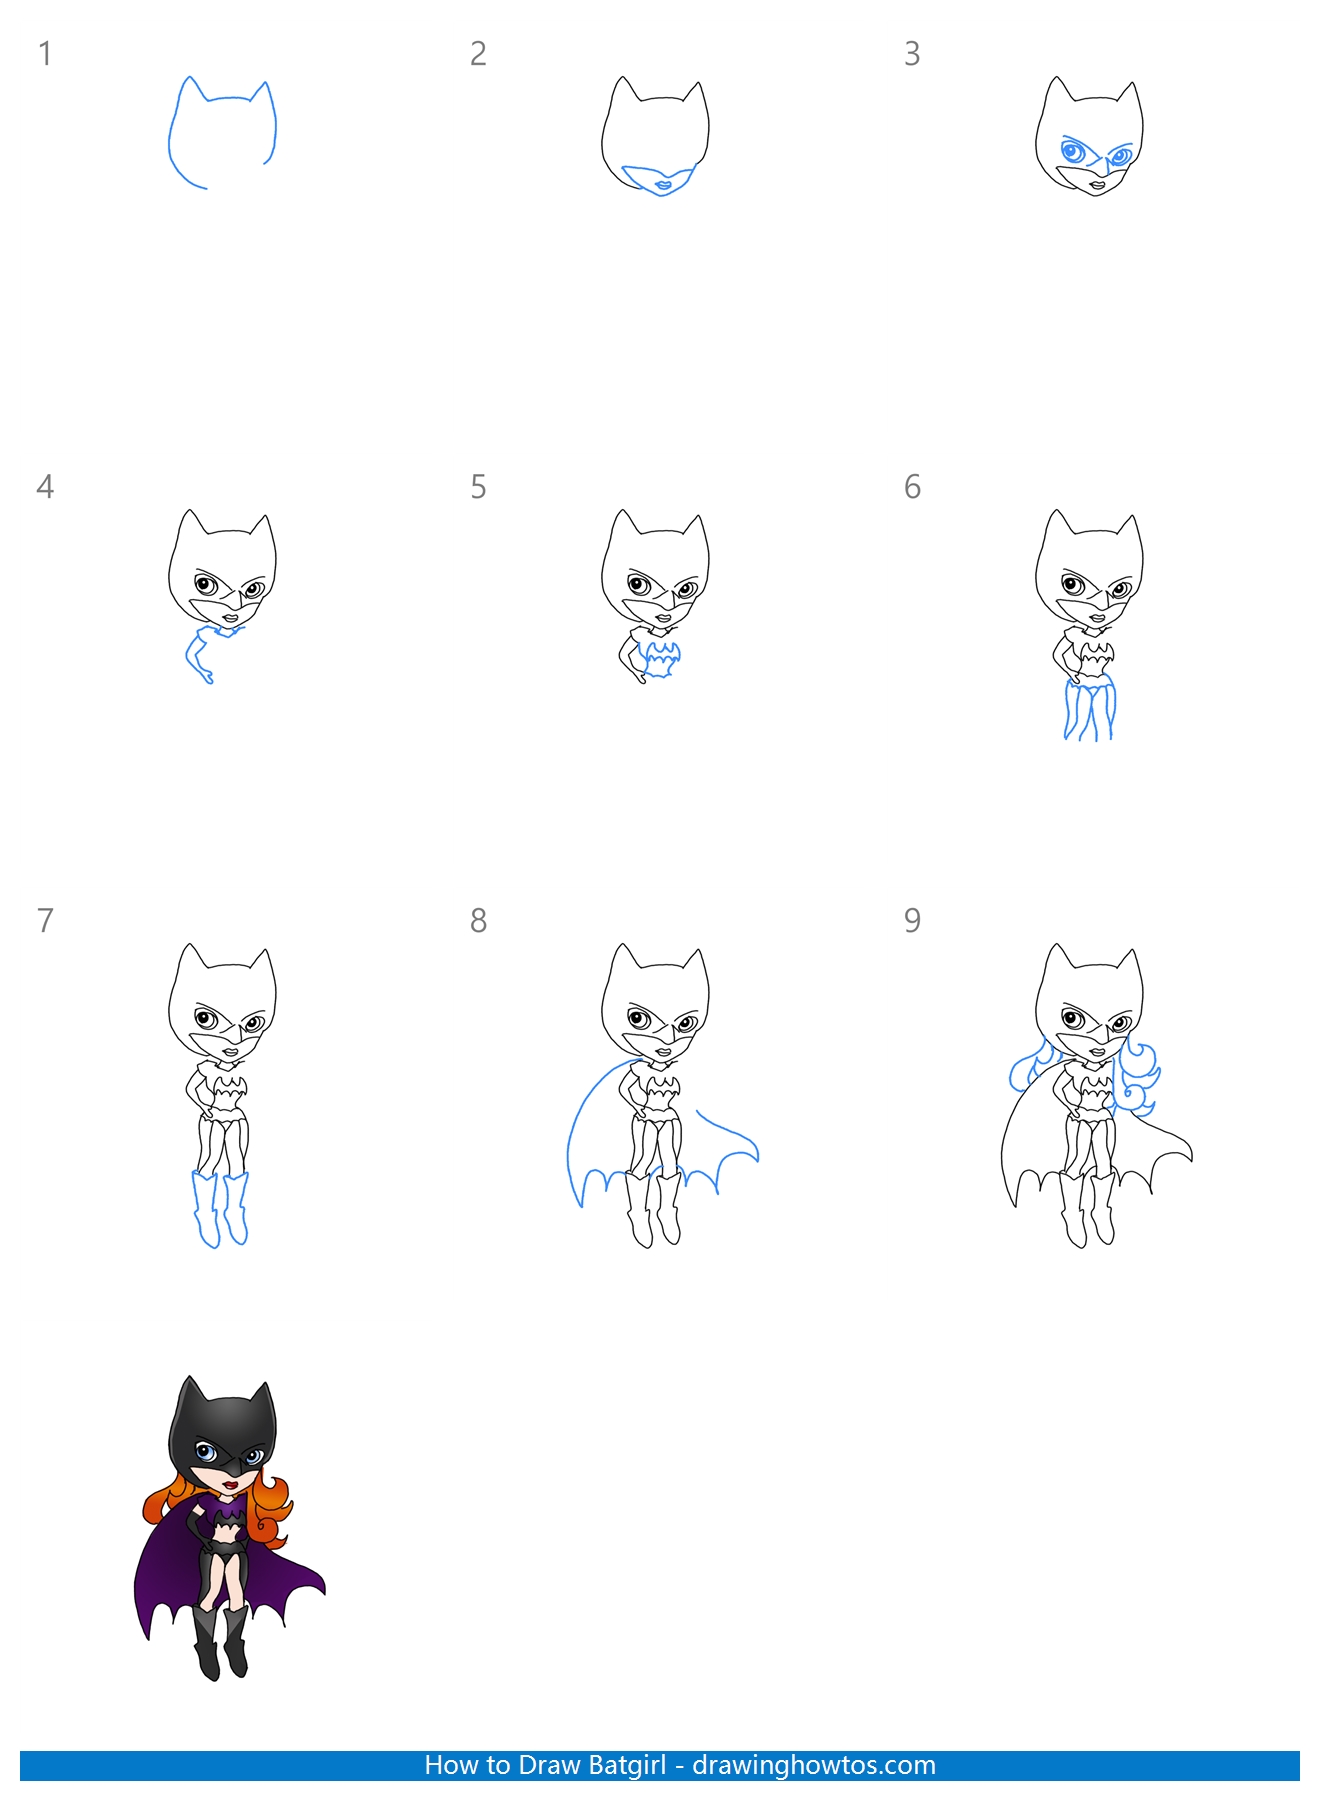 How to Draw a Batgirl Step by Step